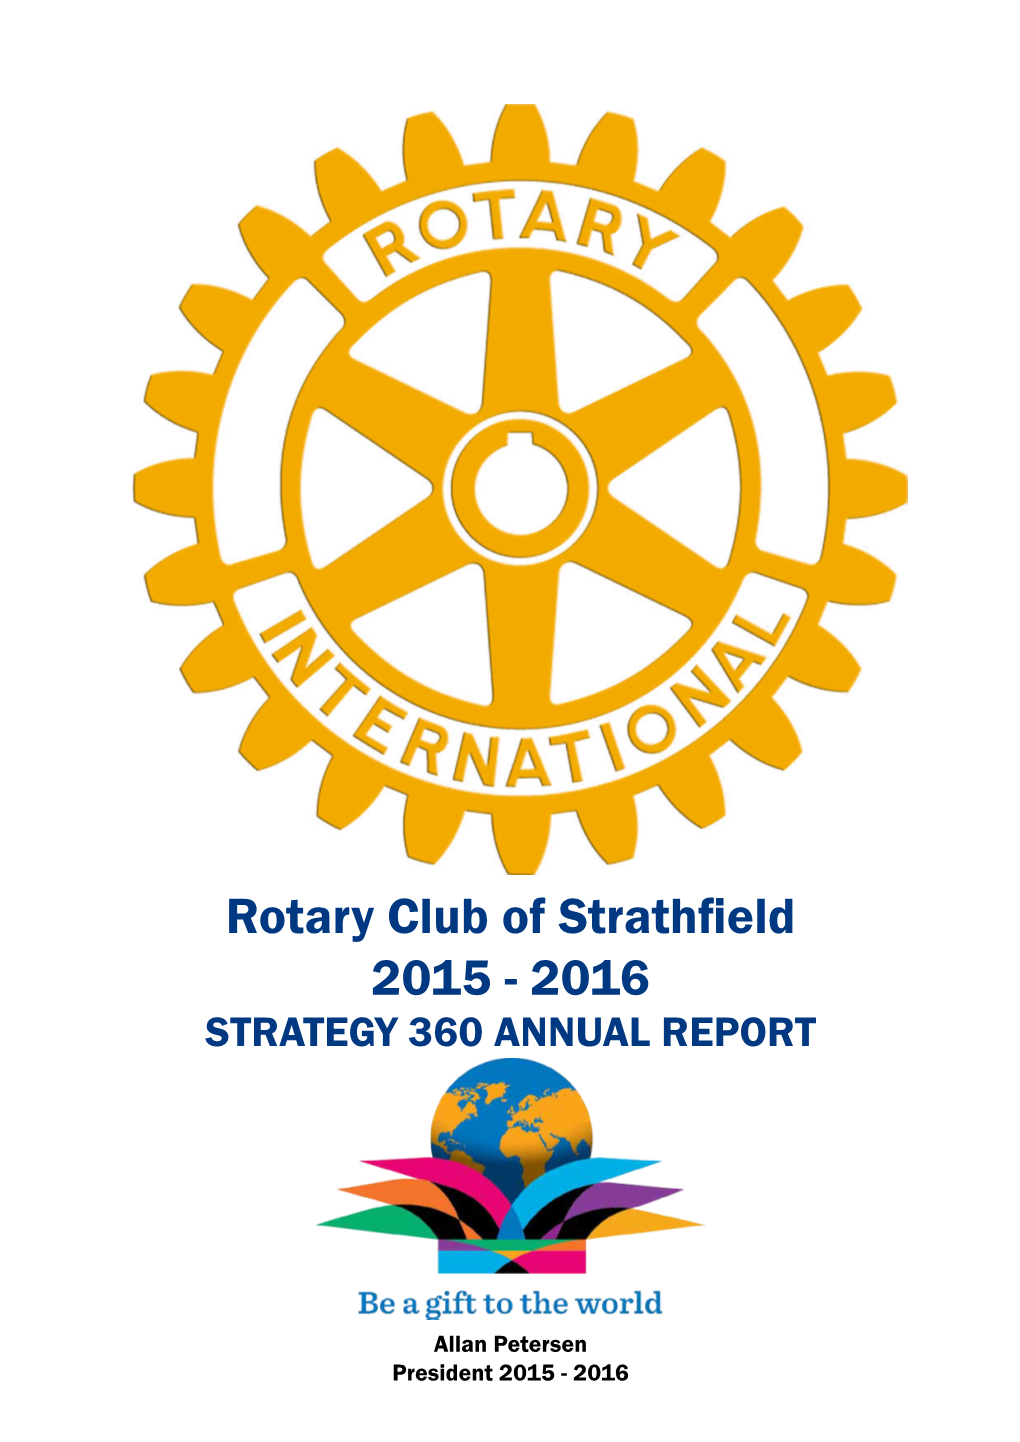 Rotary Club of Strathfield 2015 - 2016 STRATEGY 360 ANNUAL REPORT